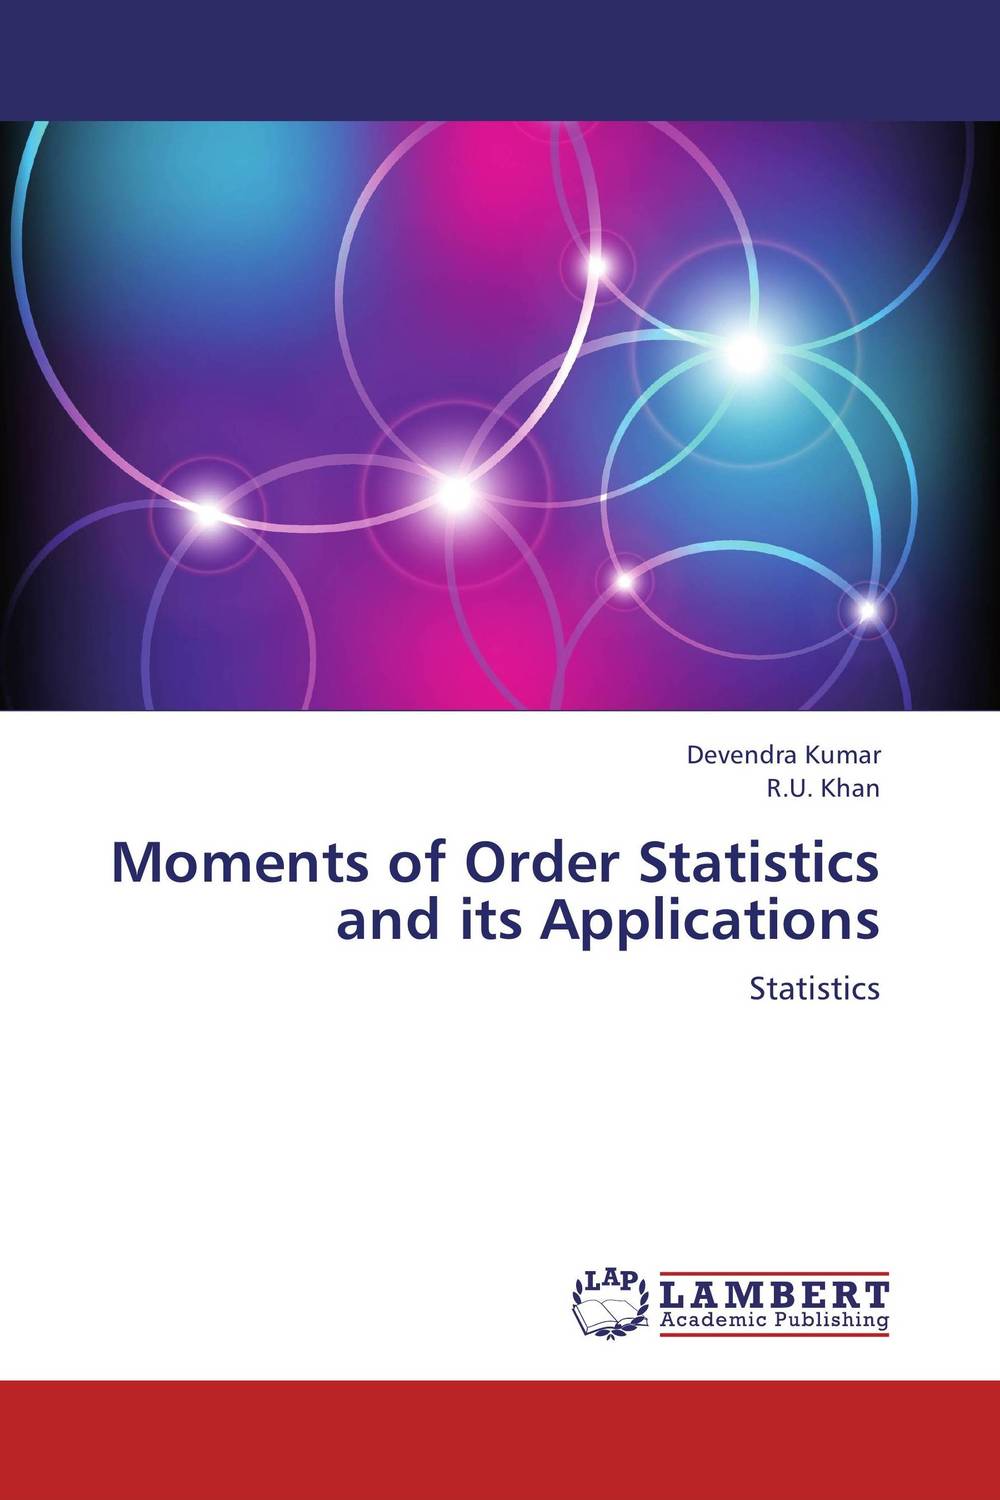 Moments of Order Statistics and its Applications